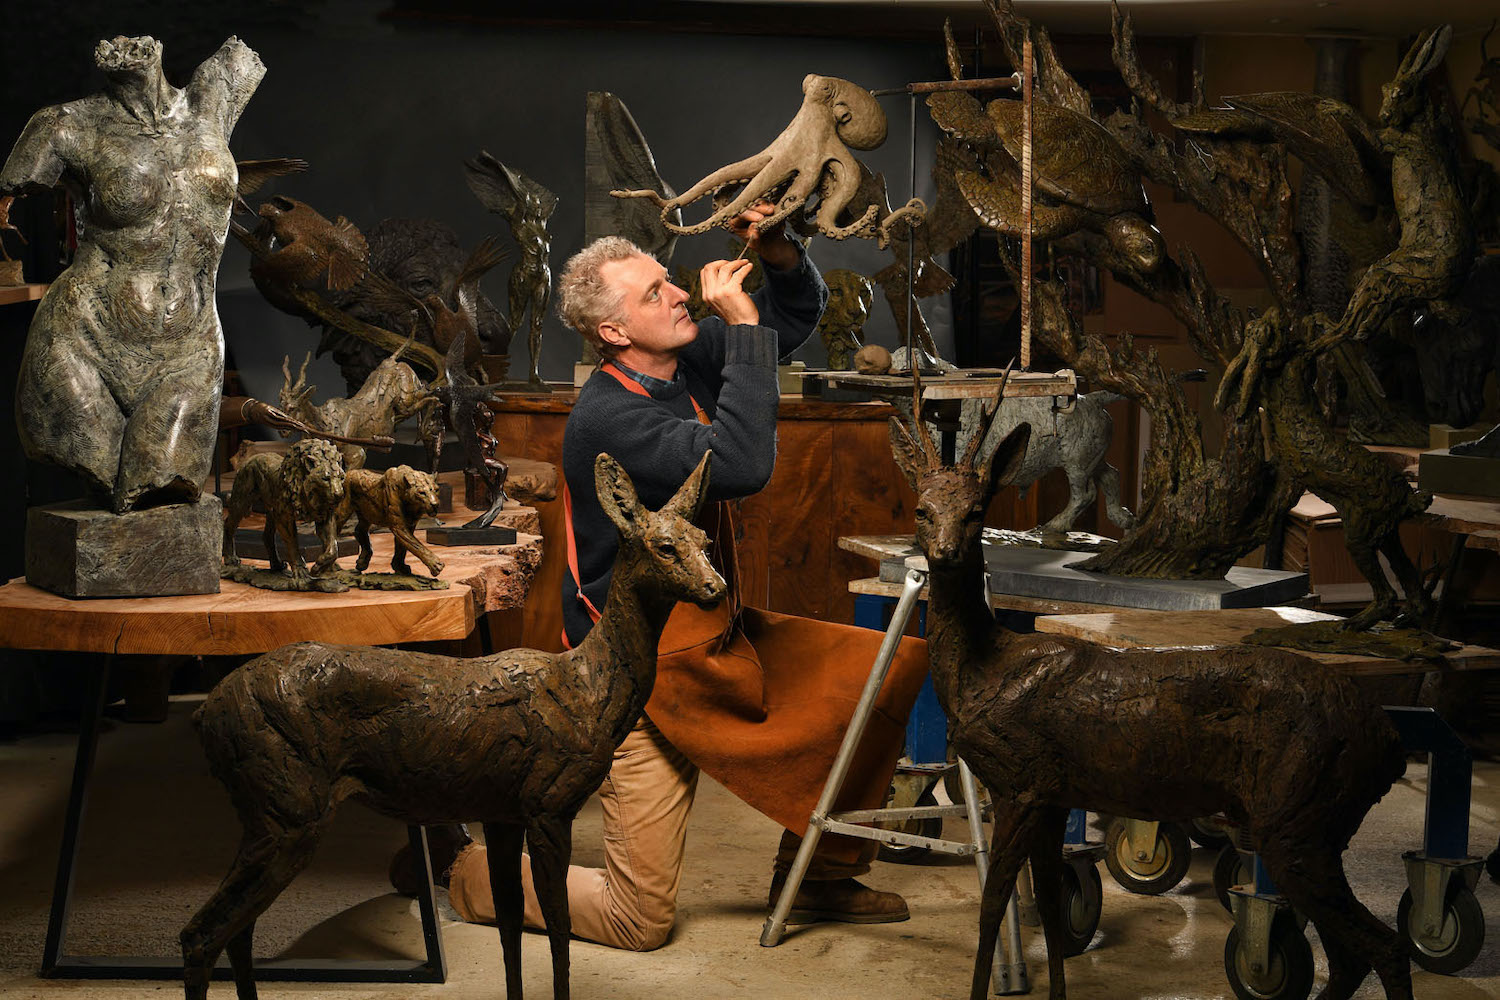 Hamish Mackie in studio surrounded by sculptures